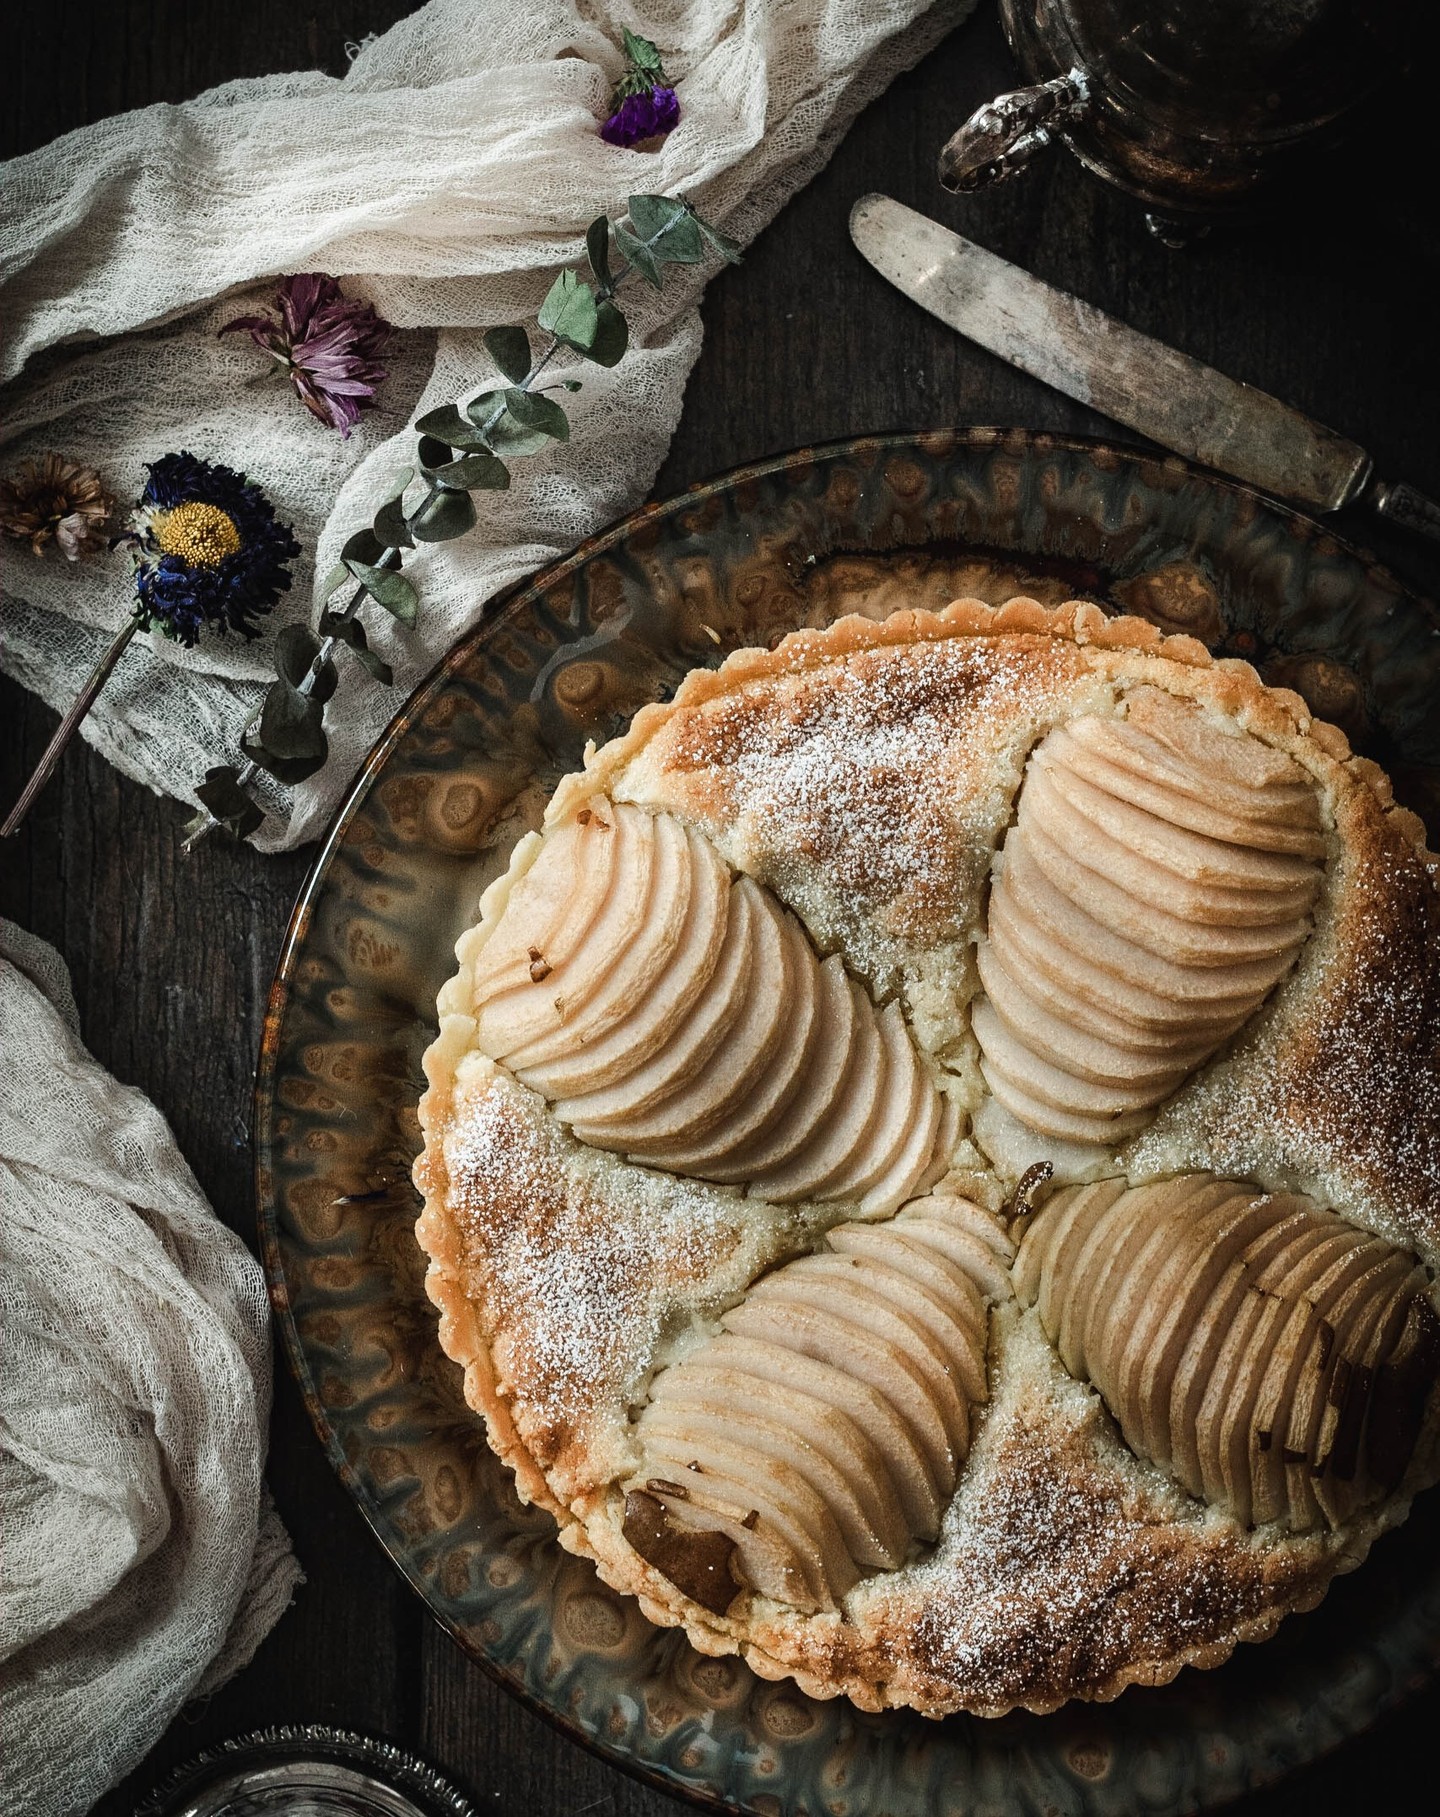 This pear and frangipane tart is a classic French dessert. 
If you have never made or had frangipane before, it is a delicious almond paste base that supports the pears. They pair together beautifully. Find this recipe in my bio, stories, or DM me!
.
.
.
.
.
.
.
.
.
.
.
.
.
.
.
.
#siftrva #tarts #frangipane #patisserie #thebiteshot #flatlaytoday #f52community #storyofmytable #bombesquad #kitchn #f52grams #thebakefeed #bakefromscratch #makemore #beautifulfood #foodphotography #foodforfoodies #shareyourtable #wherewomencreate #foodphotographyandstyling #theartofslowliving #eatrealfood #heresmyfood #imsomartha #pursueyourpassion #mywilliamssonoma #foodfluffer #foodtographyschool #glutenfree

@thebakefeed @thekitchn @foodtographyschool @surlatable